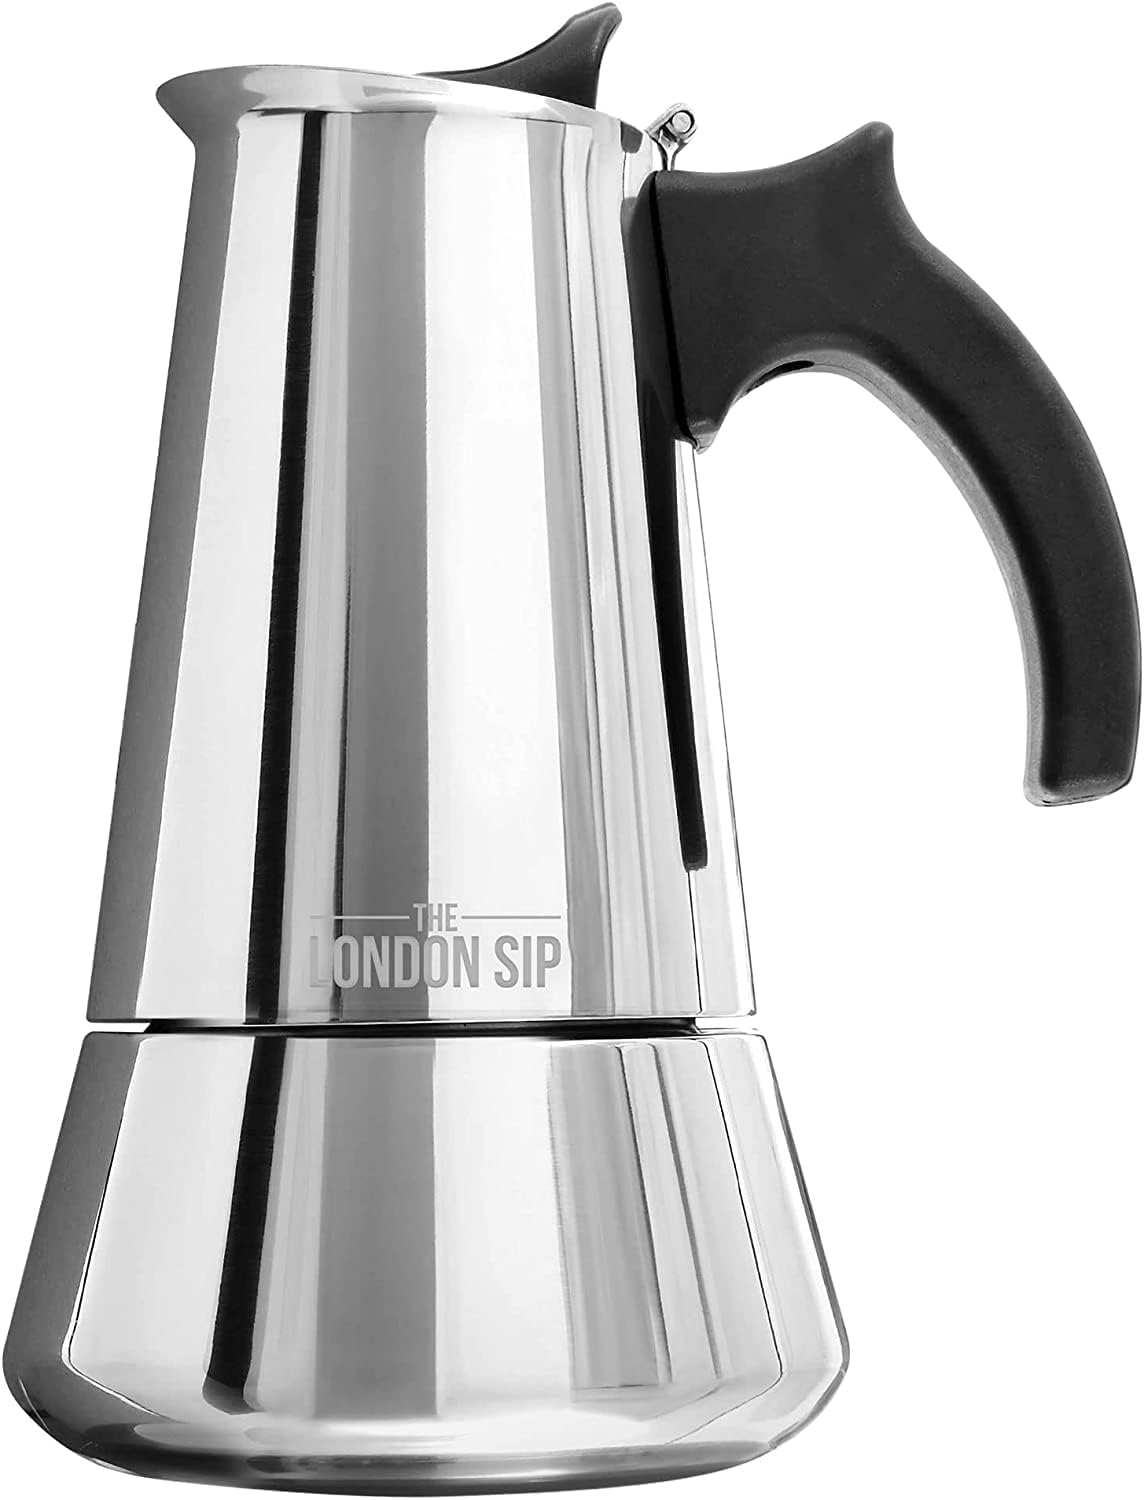 High Quality Stainless Steel Espresso Maker by the London SIP - Induction Suitable for Real Italian Espresso Enjoyment in your Home - Easy to Prepare and Clean - (Silver, 6 Cups 300ml)